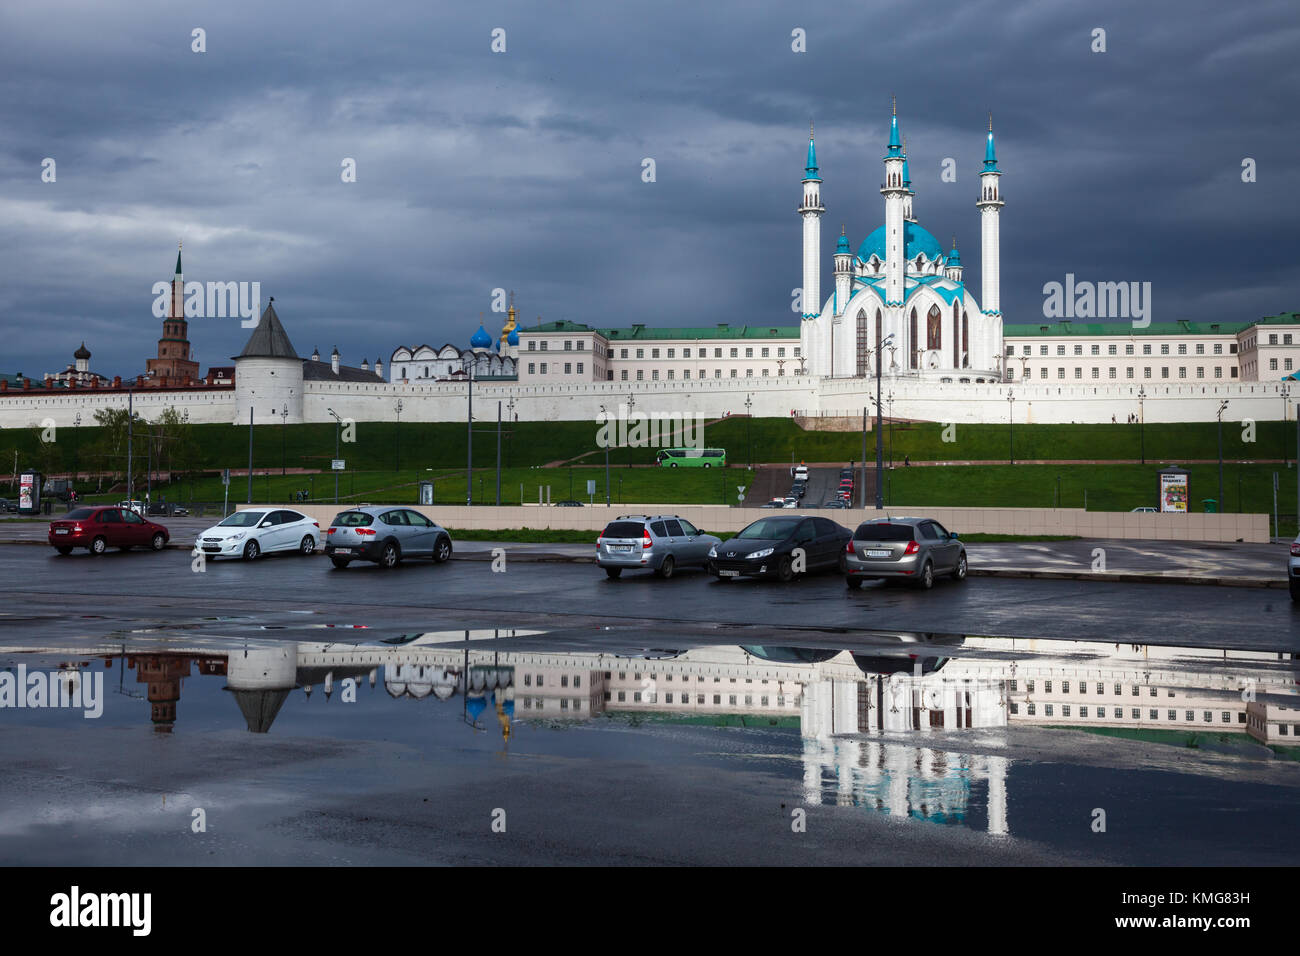 KAZAN, TATARSTAN, RUSSIA - MAY, 8 2016: Cars parked on the Tysyacheletiya Square (Millennium Square), one of the biggest squares in Russia Stock Photo